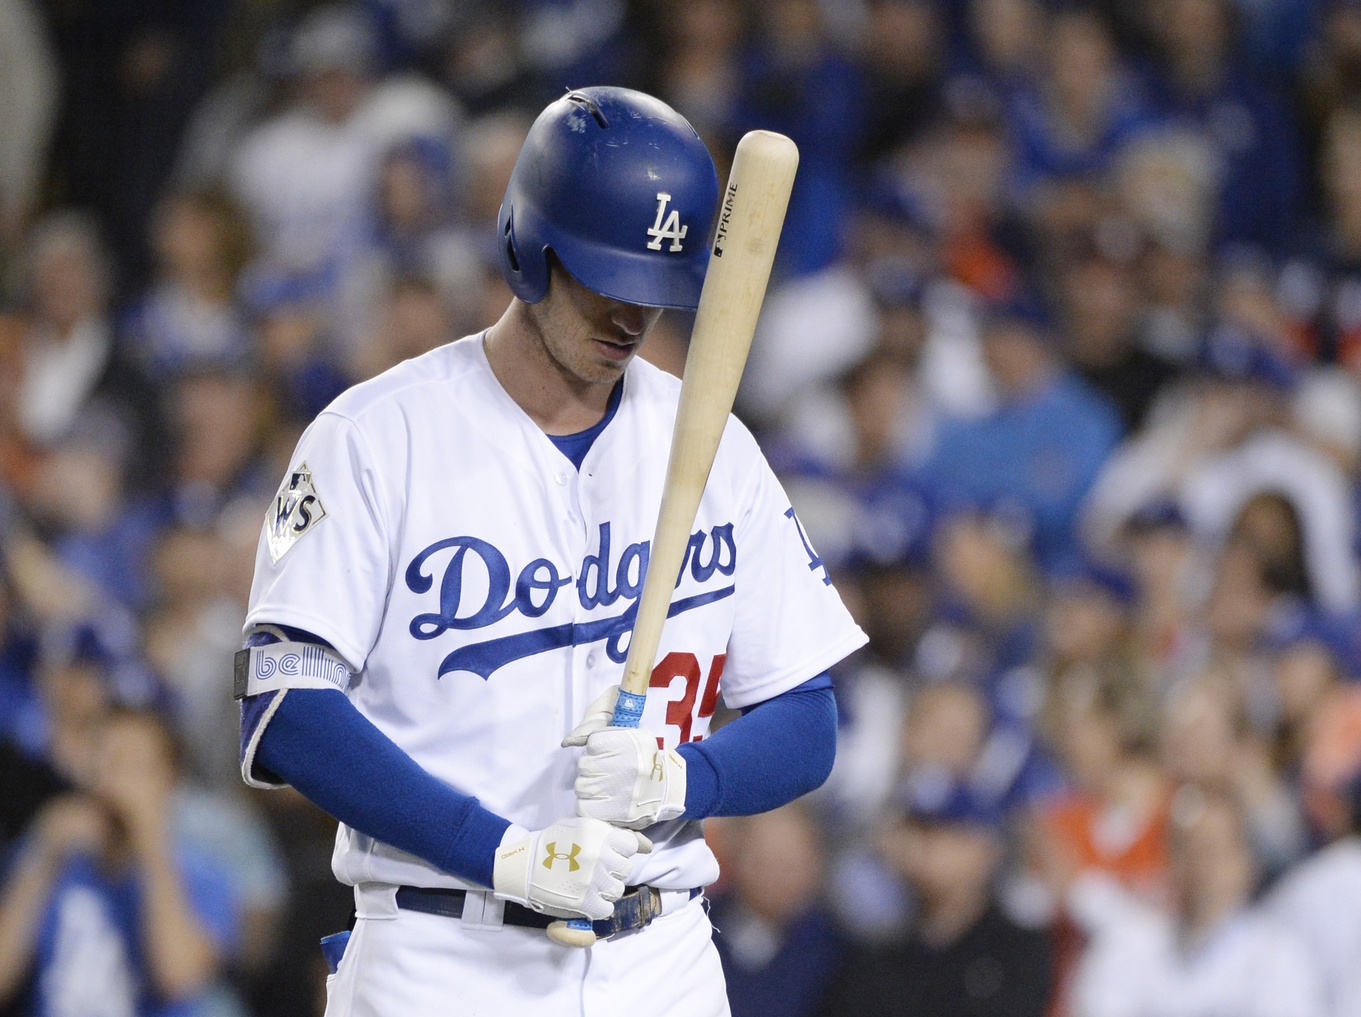 Dodgers-Cody Bellinger relationship really seems like it didn't